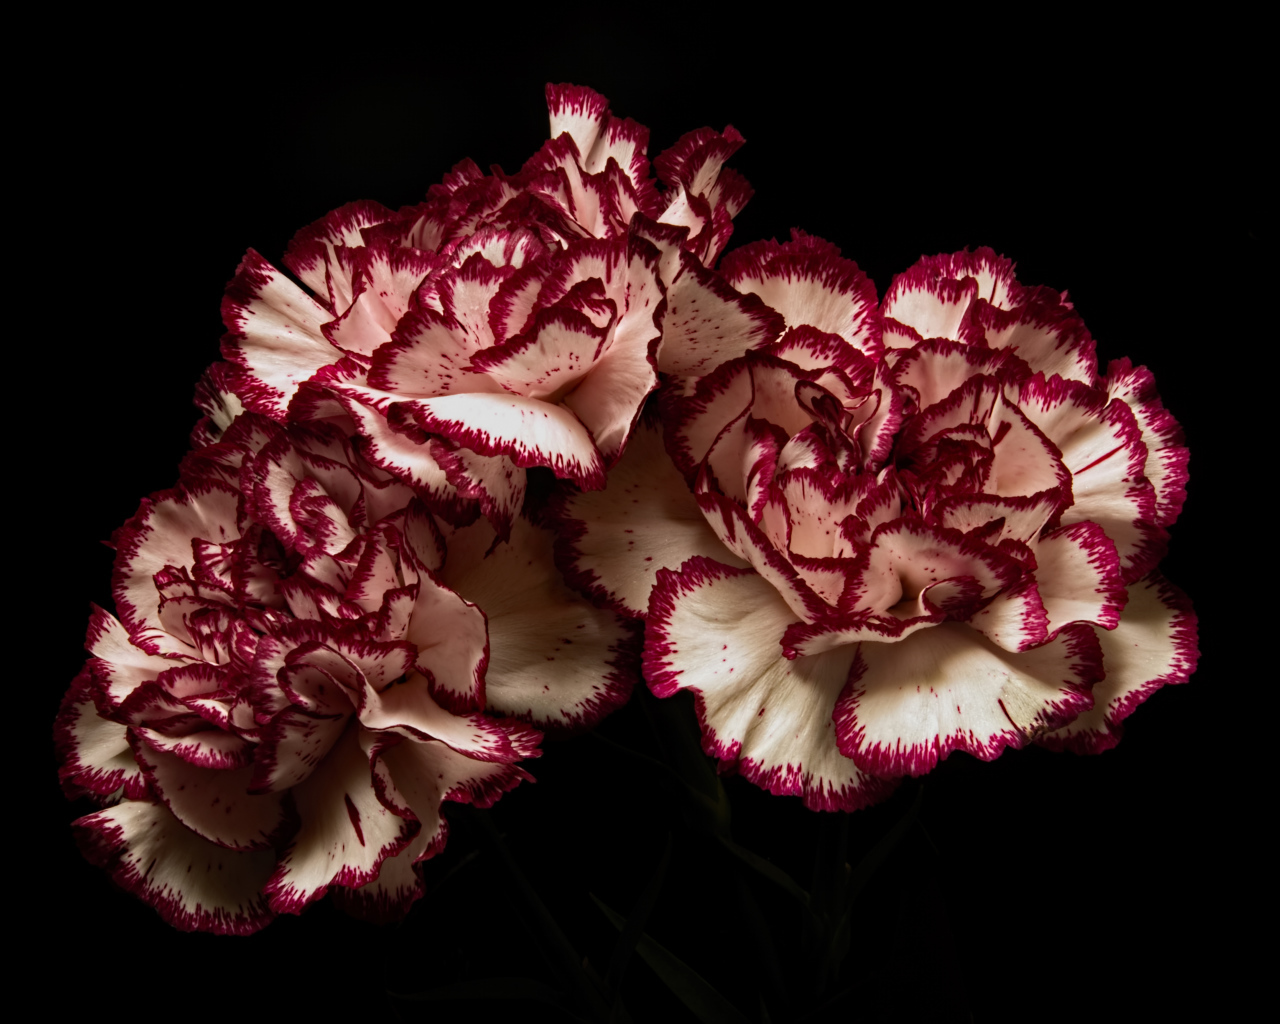 White carnations with red rims on a black background